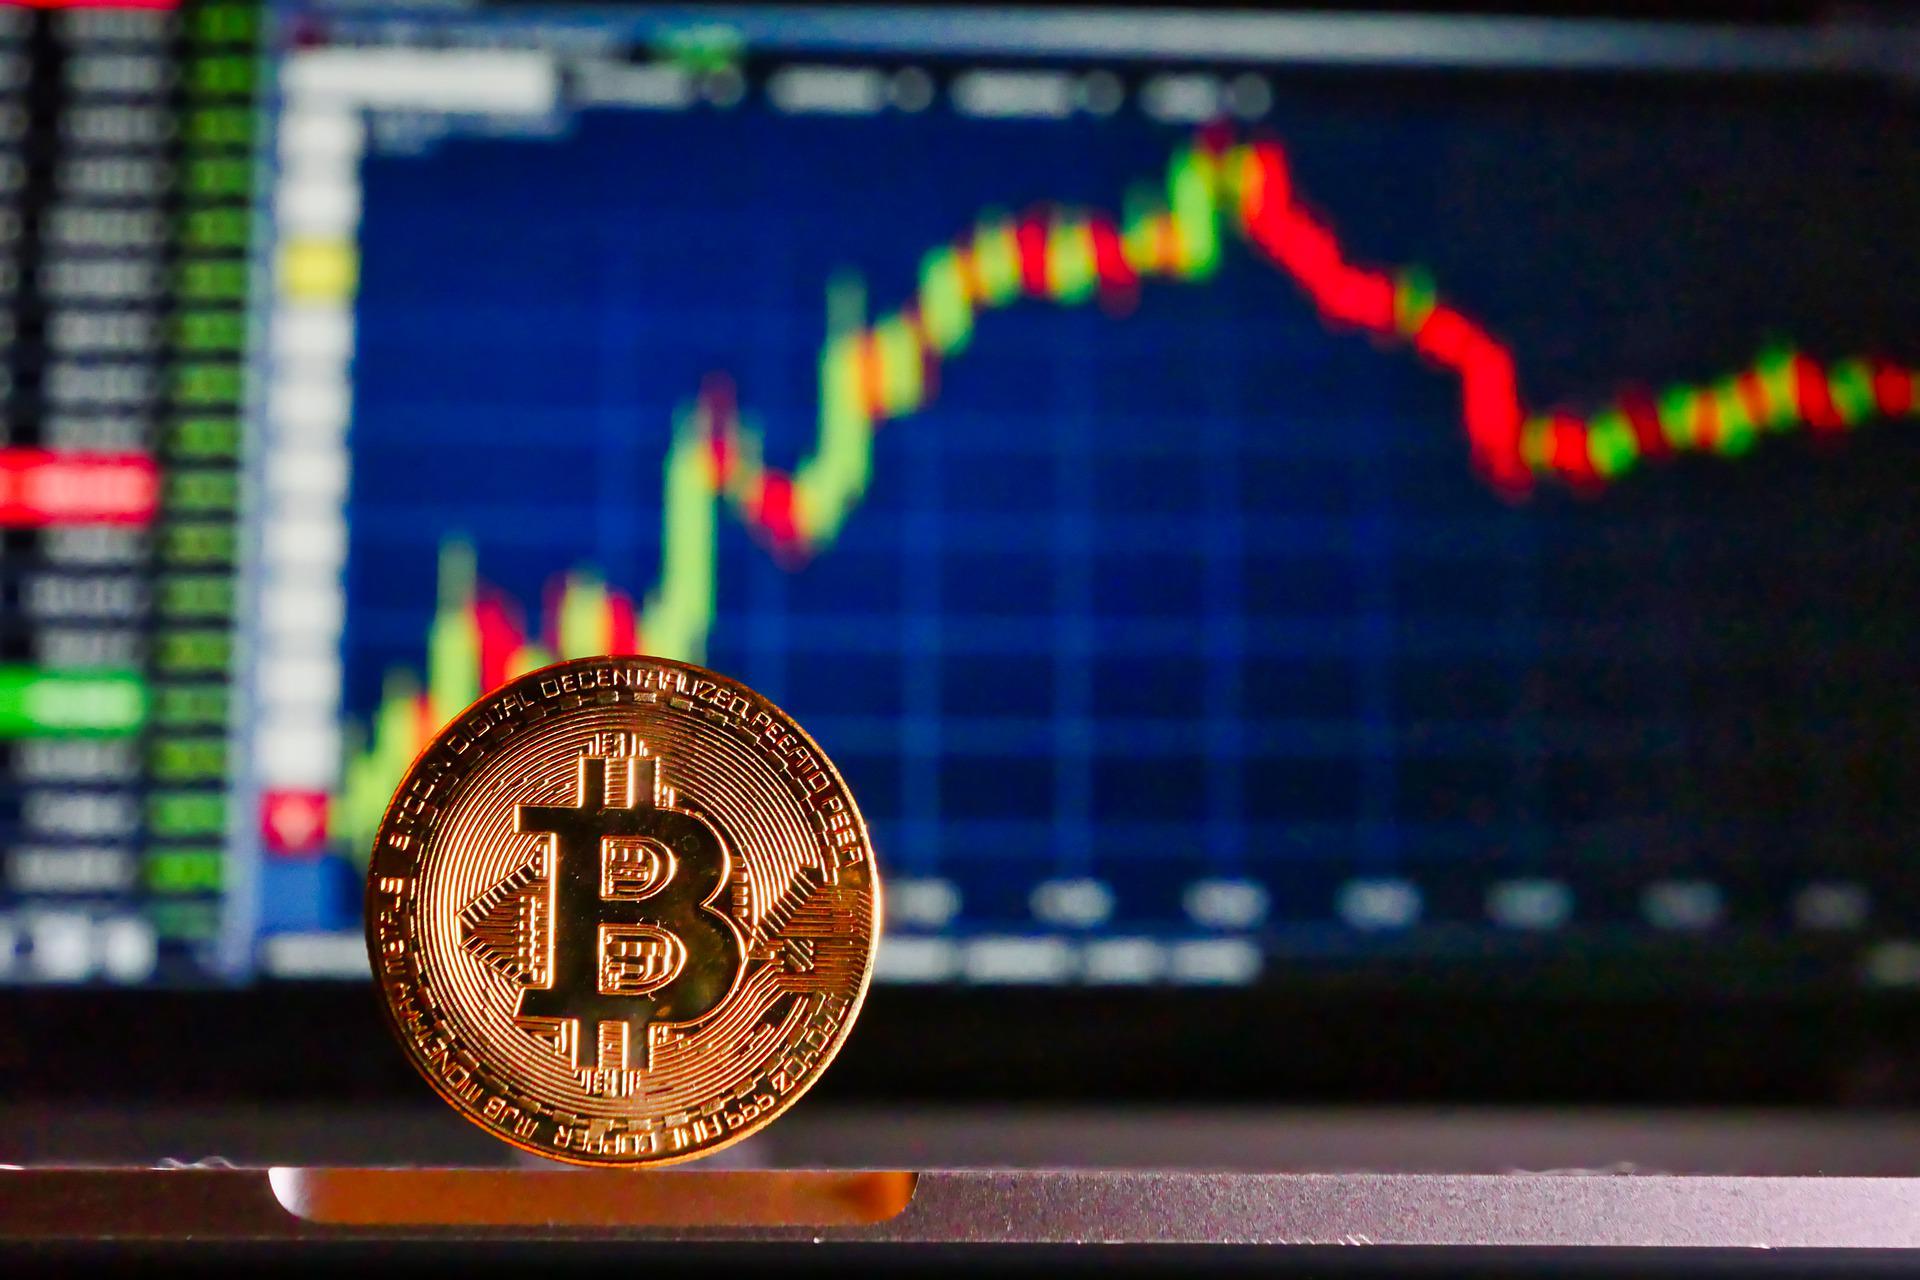 Bitcoin OG Urges Investors to ‘Buy the Dip’ After $400 Crypto Billion Market Sell-Off